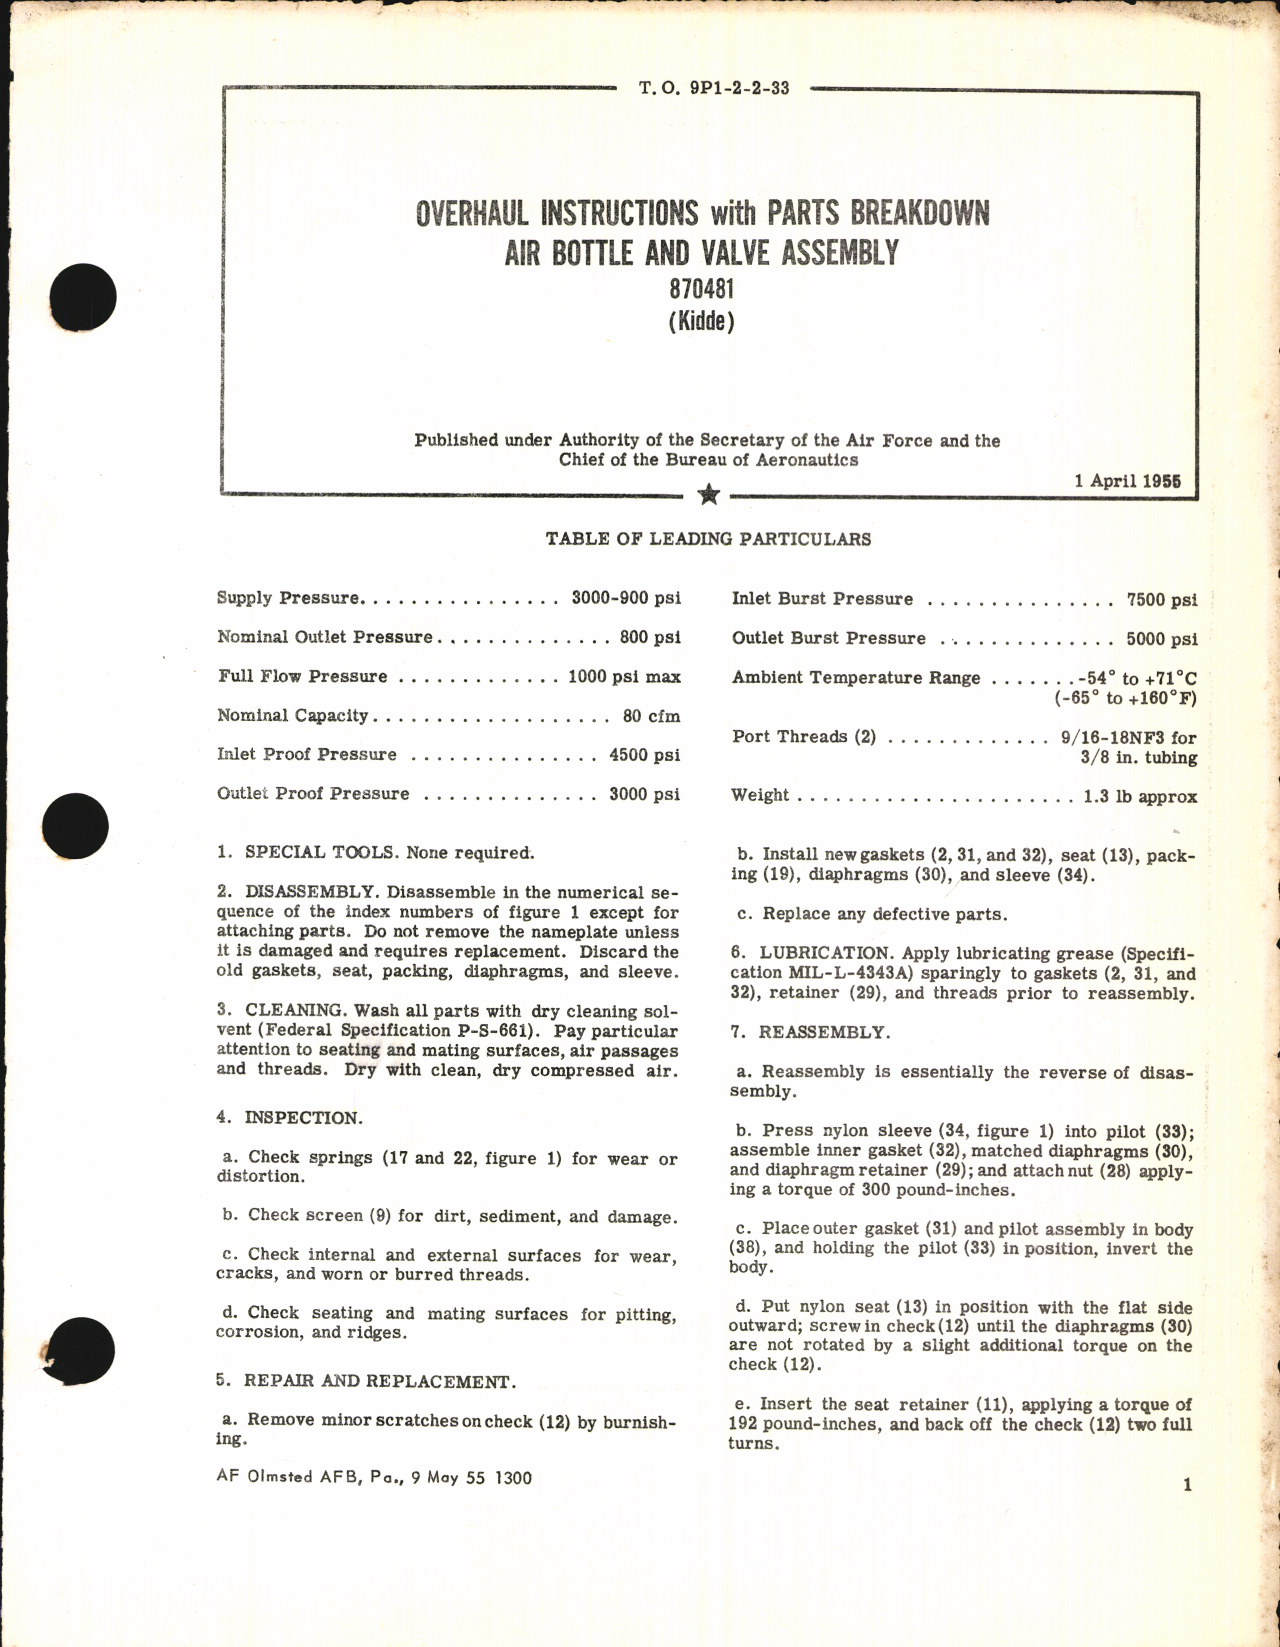 Sample page 1 from AirCorps Library document: Overhaul Instructions with Parts Breakdown for Air Bottle and Valve Assembly 870481